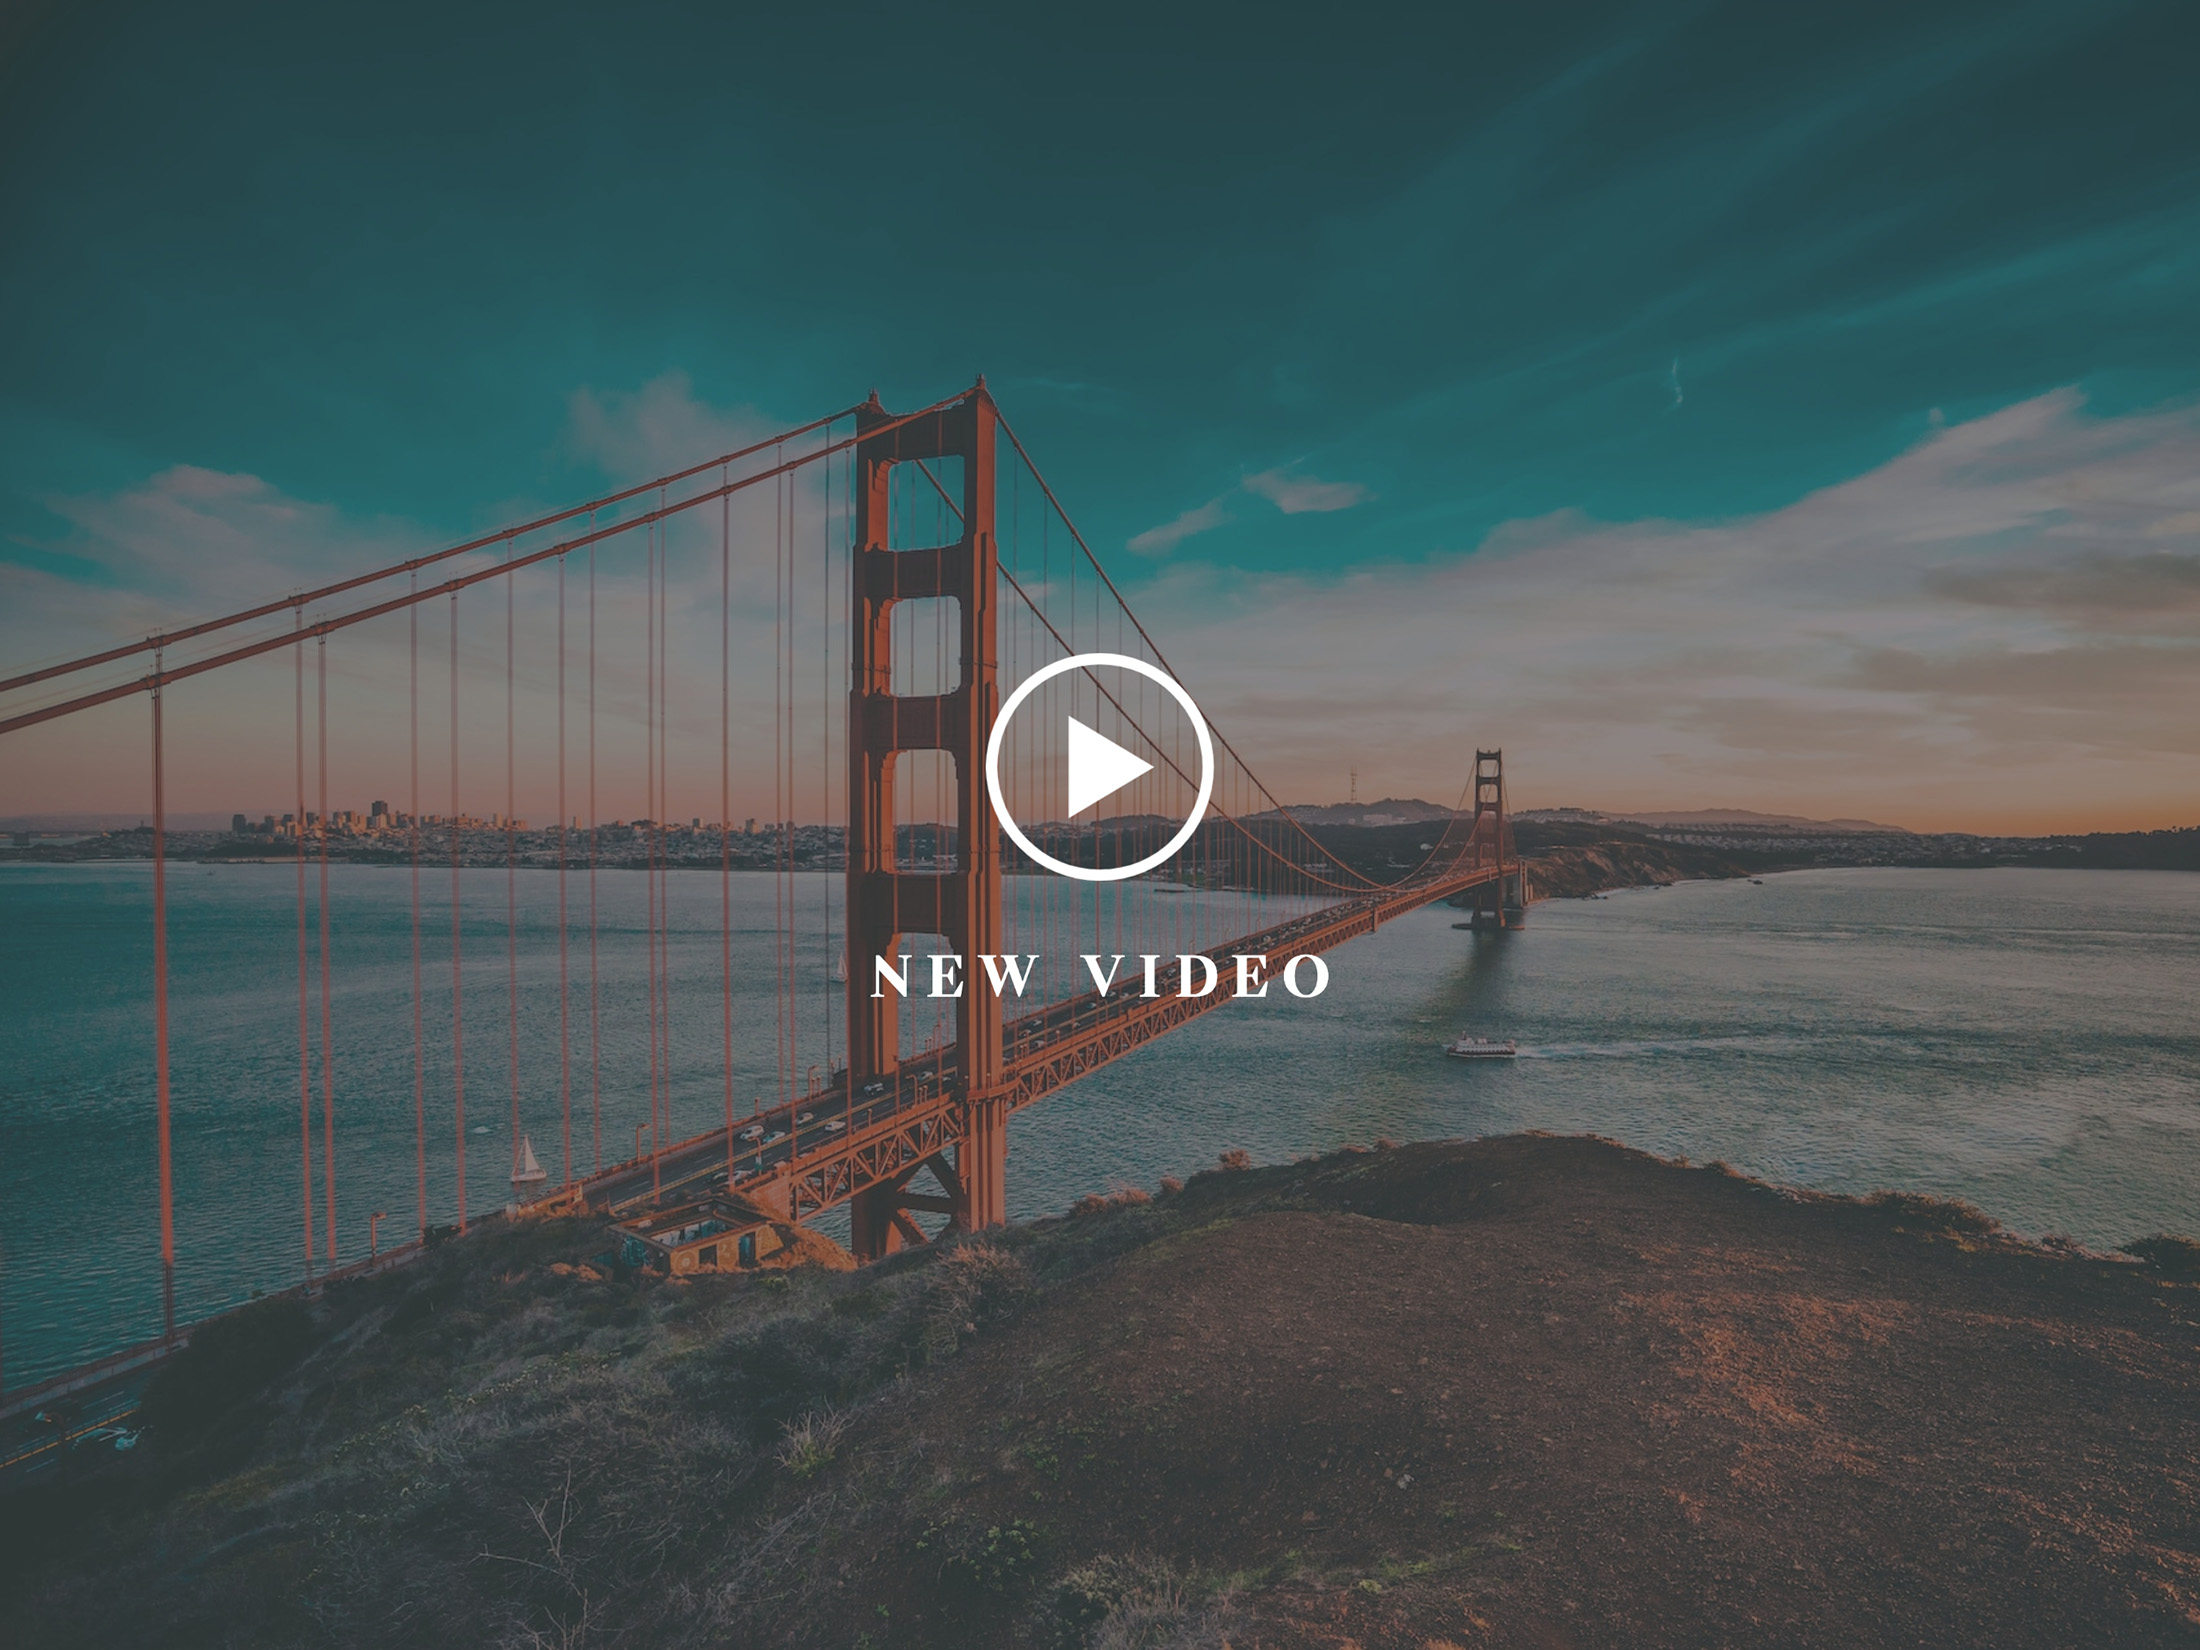 Image of the Golden Gate bridge with a video icon overlay